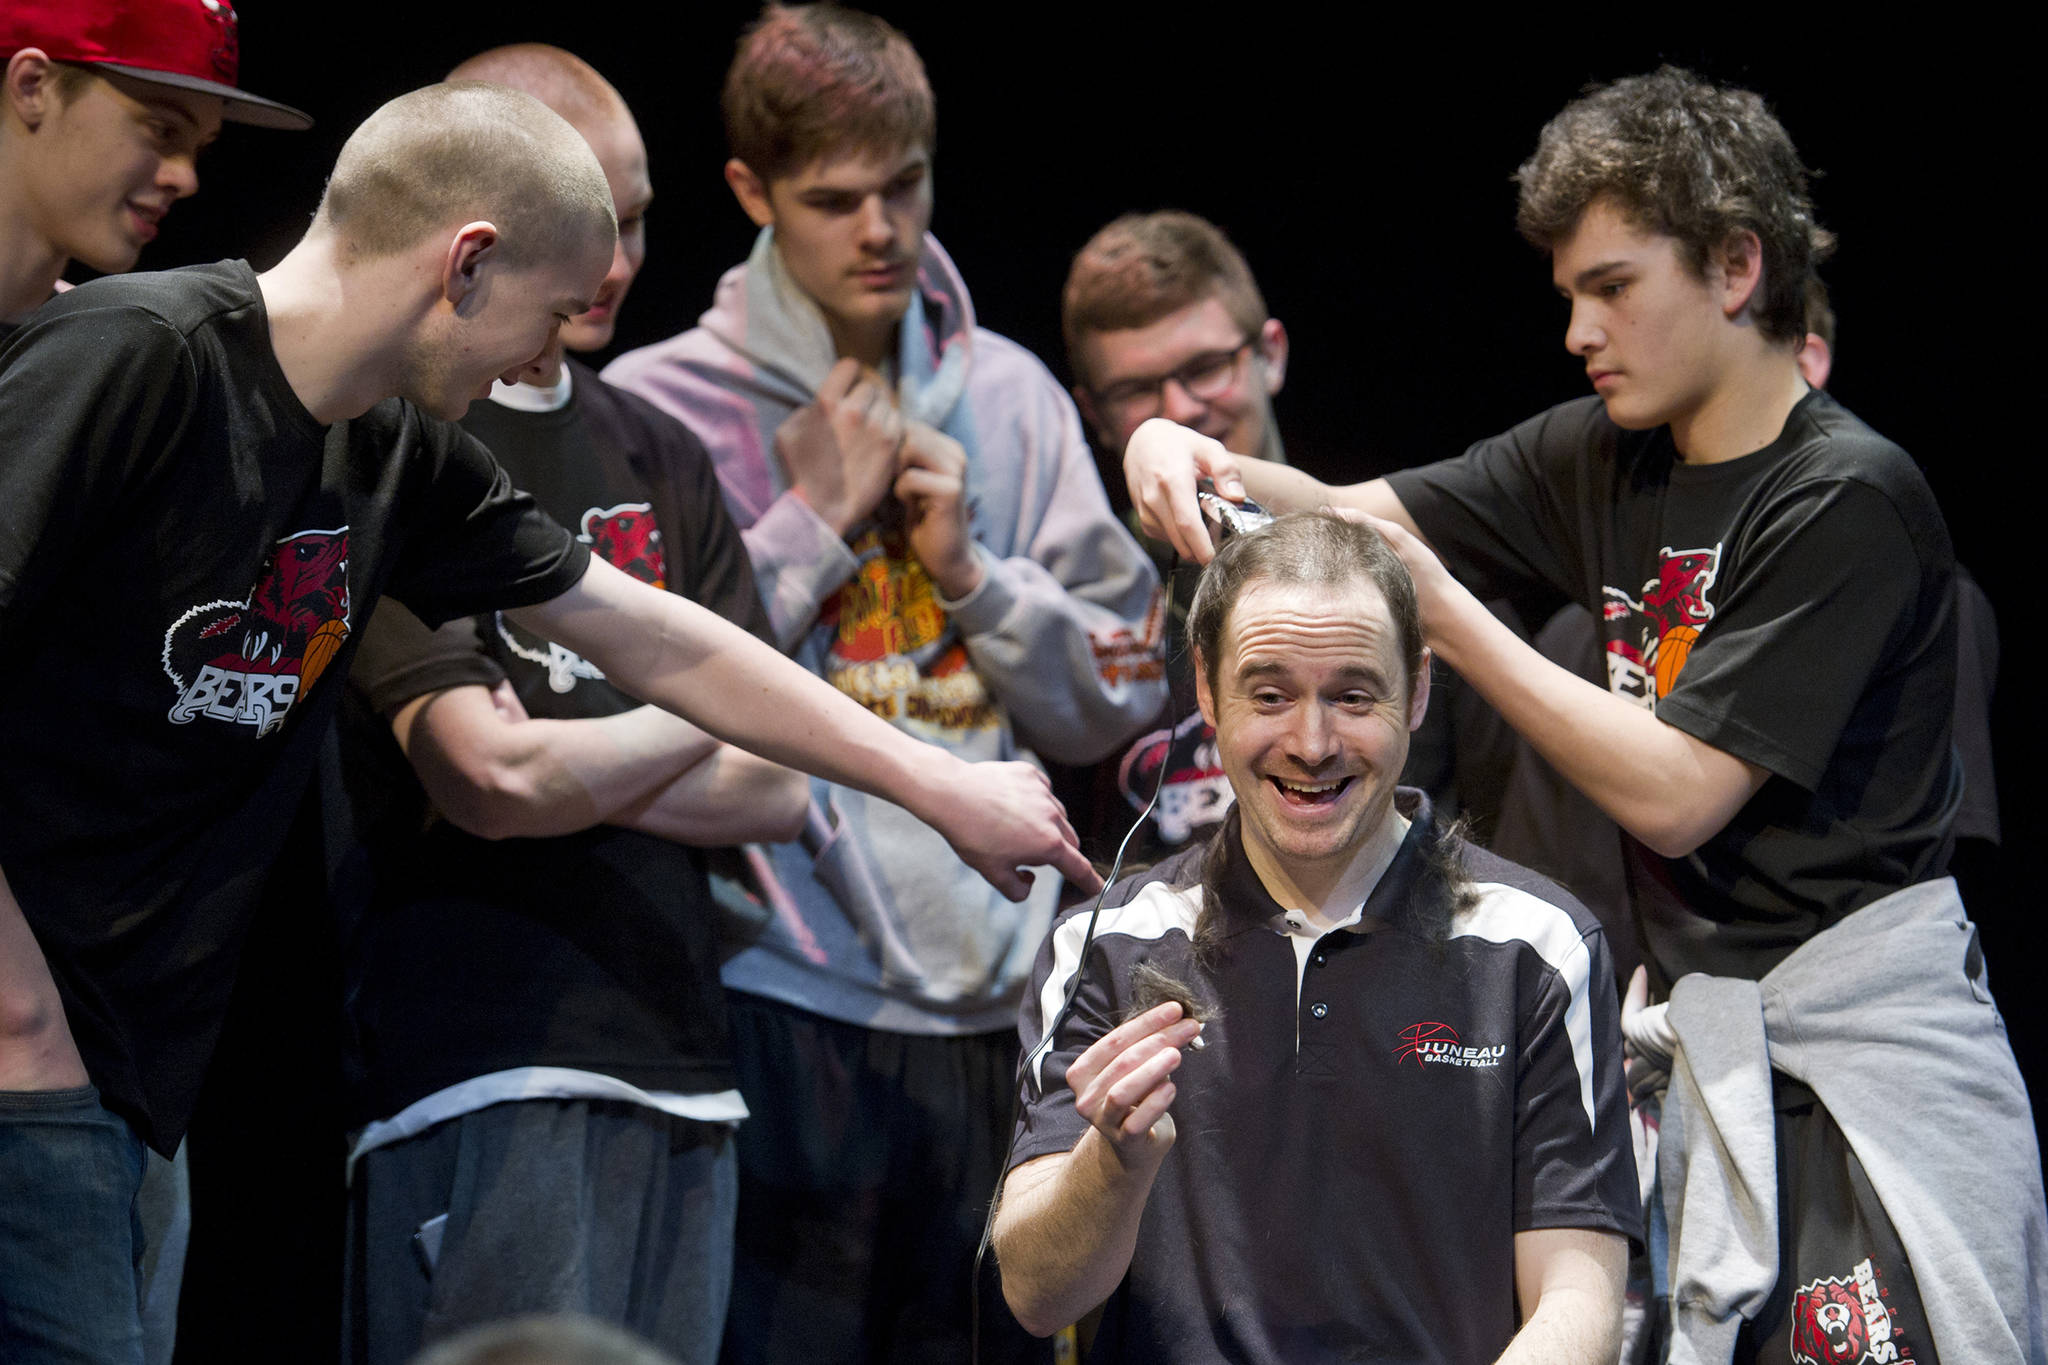 Juneau-Douglas High School head basketball coach Robert Casperson gets his hair cut on stage by senior Treyson Ramos during a school assembly Wednesday, holding up his end of the bargain that he would shave his head if his team won the state championship title. Casperson said he trusted the 2016 team's senior class a lot.